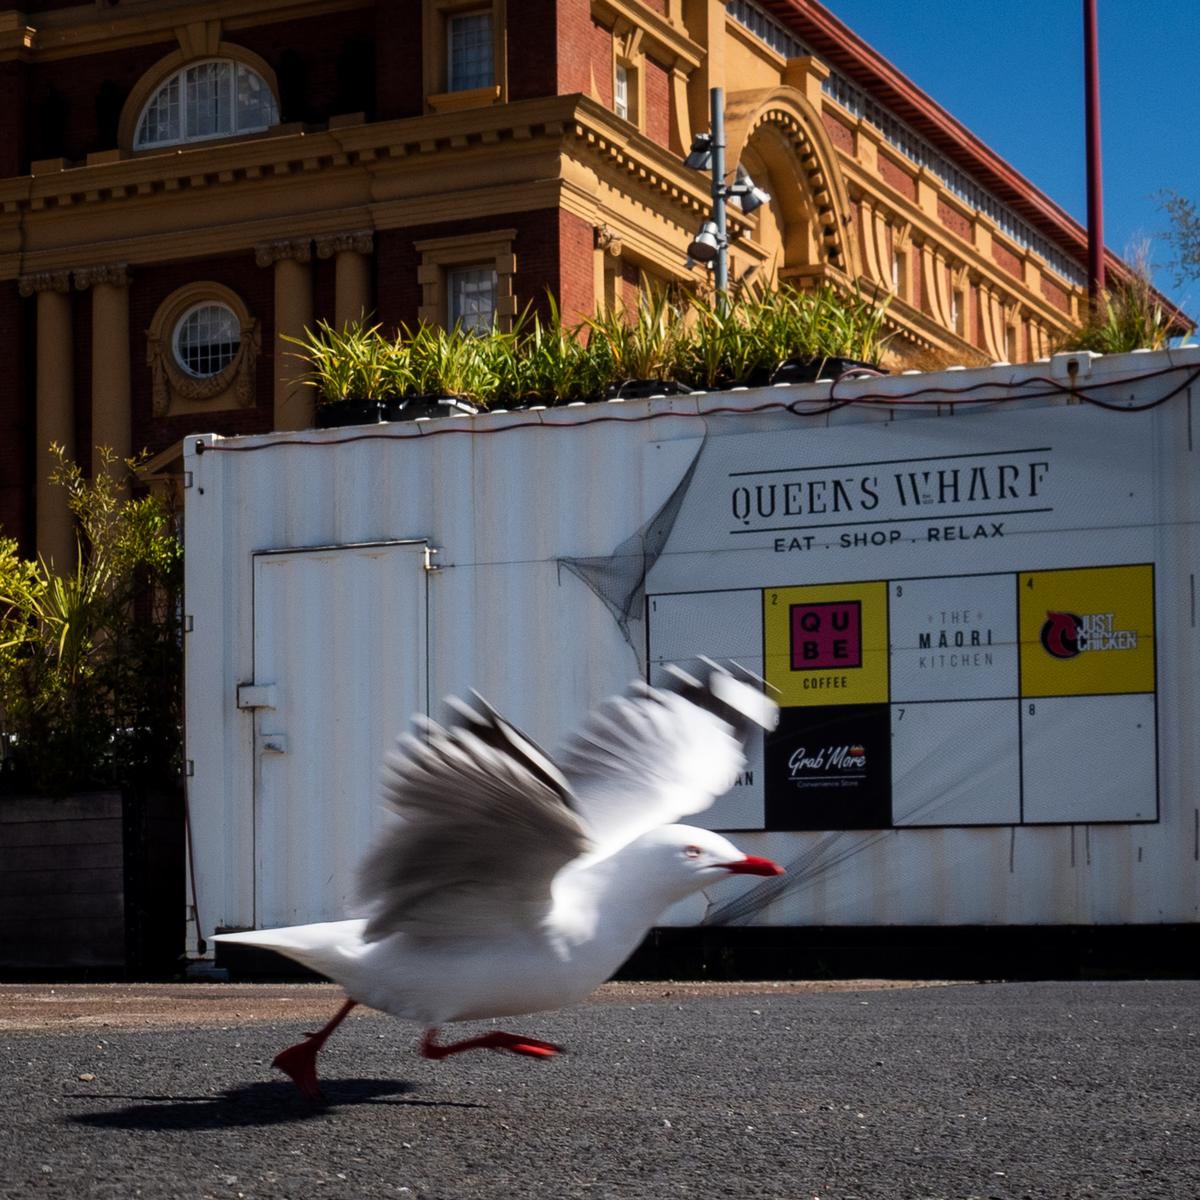 Andrew Malmo; Red billed gull in take off, Queen's Wharf;Waited for a while for the take off, quite pleased with the blurred effect.